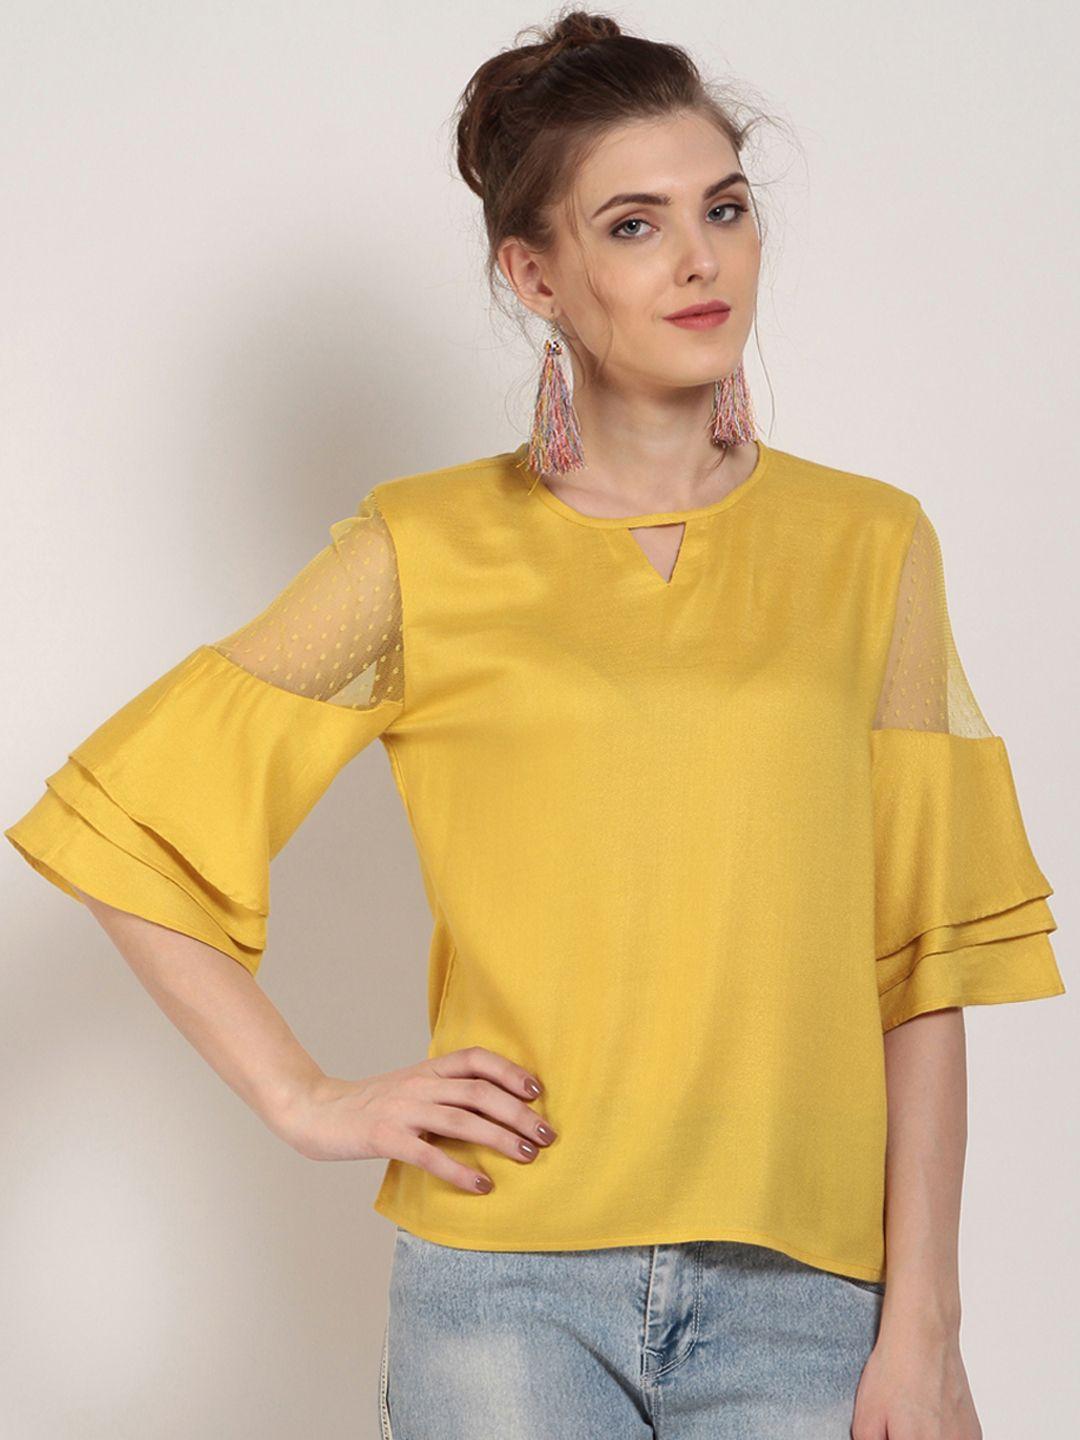 marie claire women mustard solid top